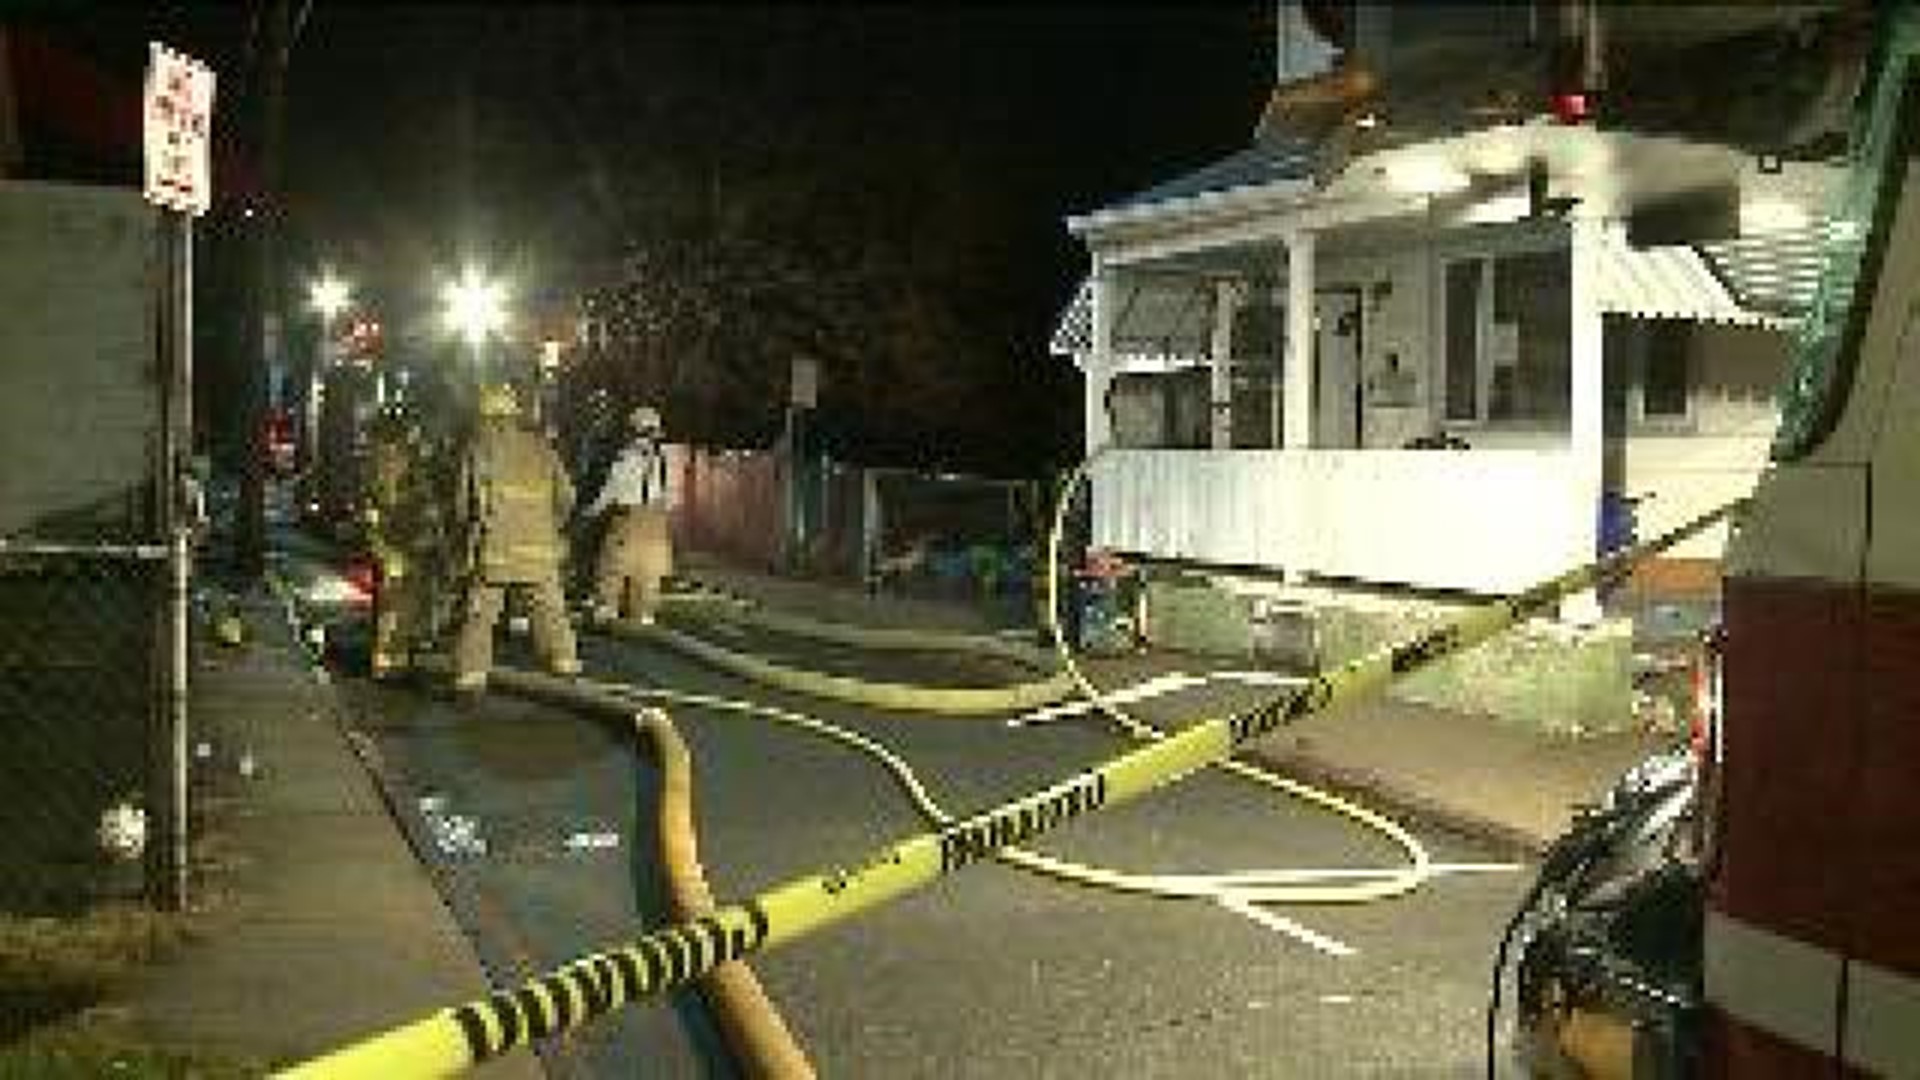 Fire Damages a Home in Wilkes-Barre